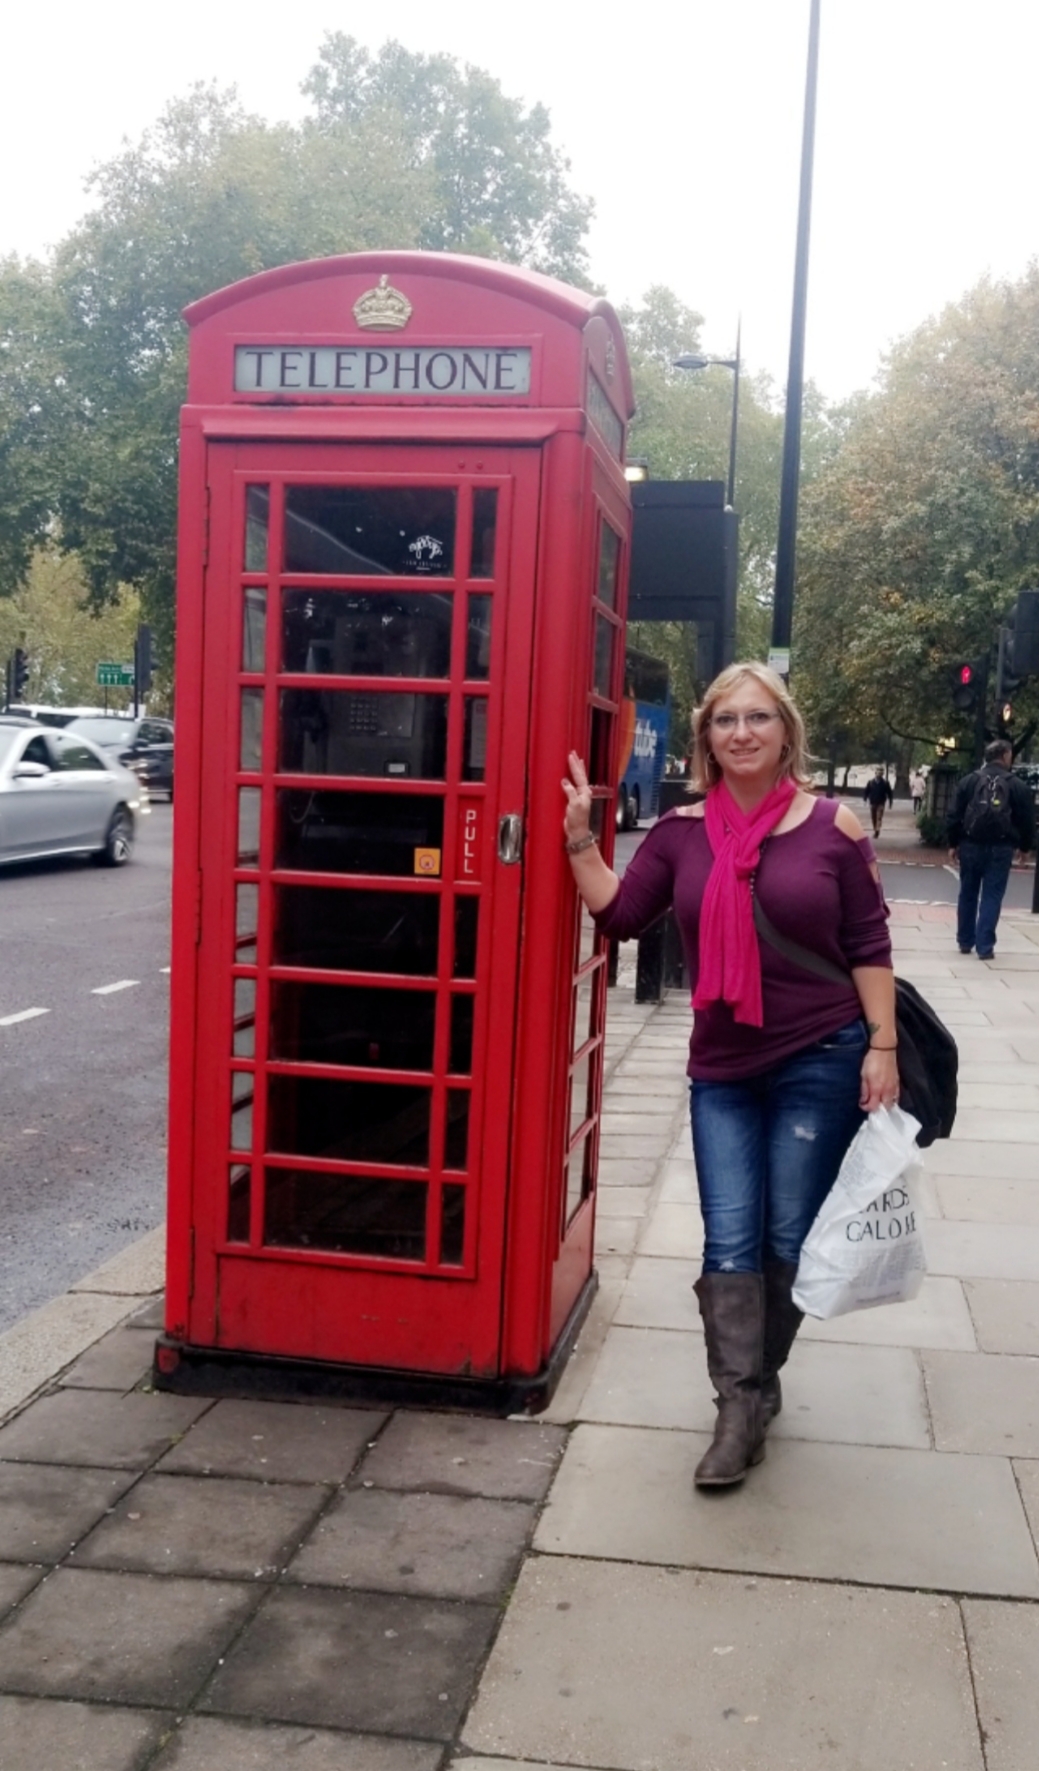 Lynnita Truesdell stands next to a telephone booth while traveling abroad